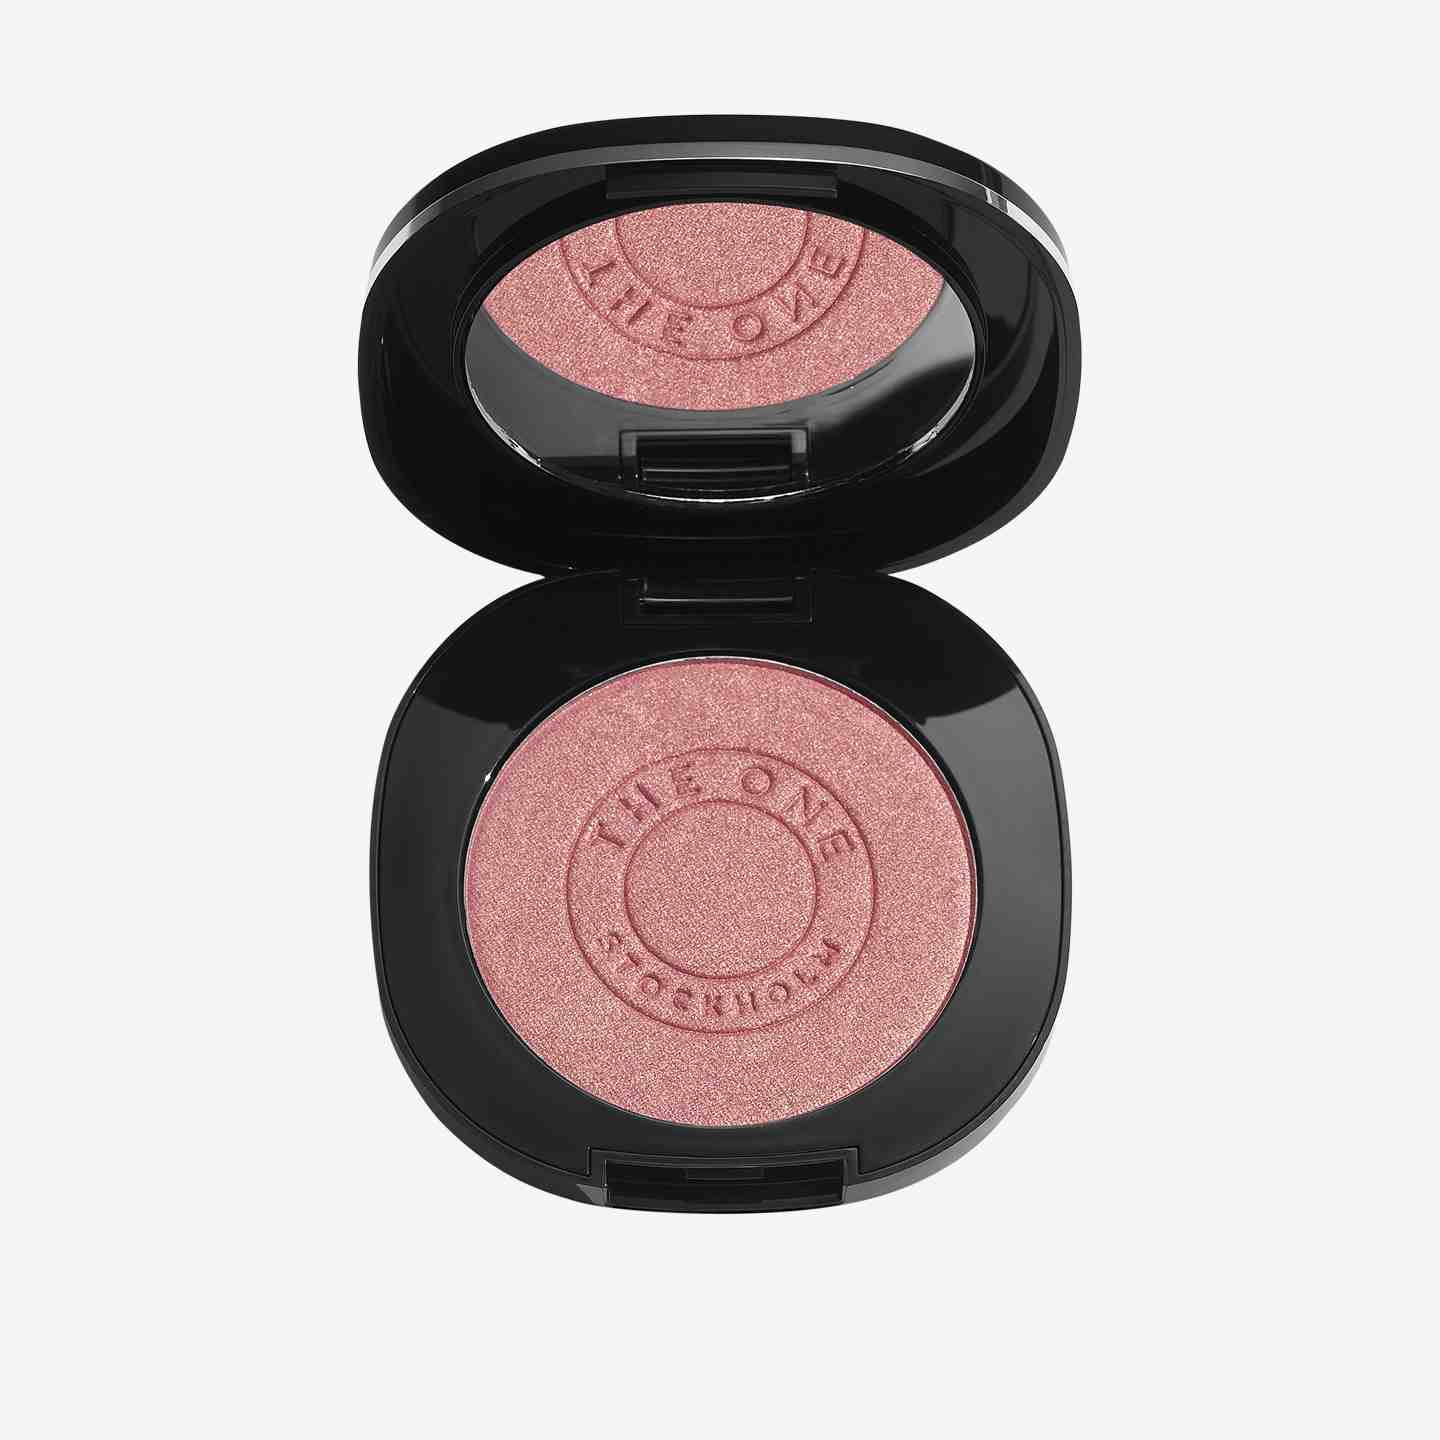 Wholesale Bulk Pink Blush Palette Private Label Cosmetics For Face Makeup,  Matte Pressed Powder, Oriflame Blusher Ideal For Business 231124 From  Nan07, $64.59